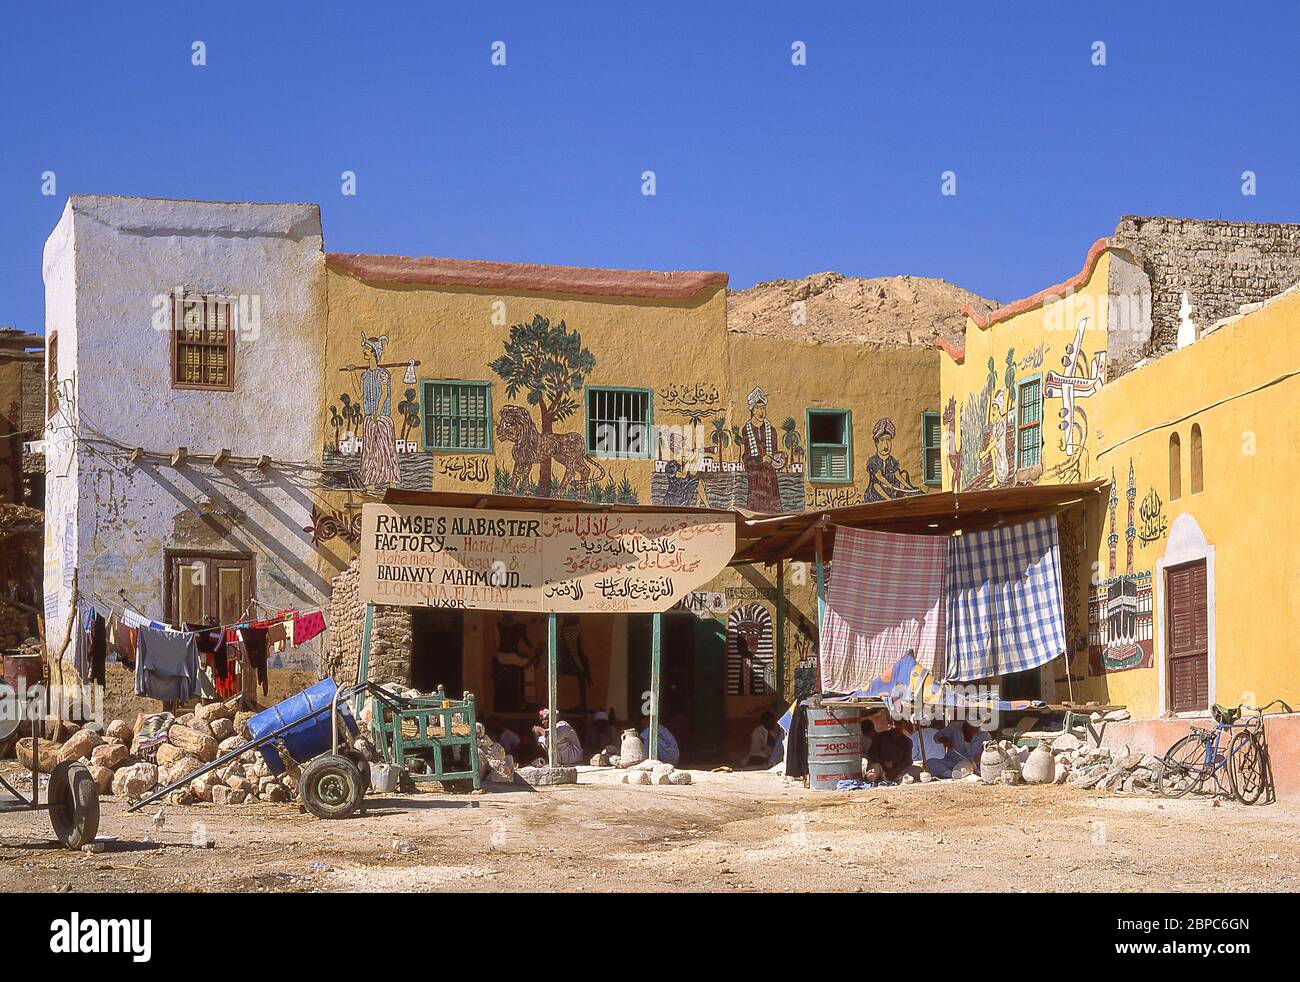 Ramses alabaster factory shop exterior, Luxor, Luxor Governorate, Republic of Egypt Stock Photo